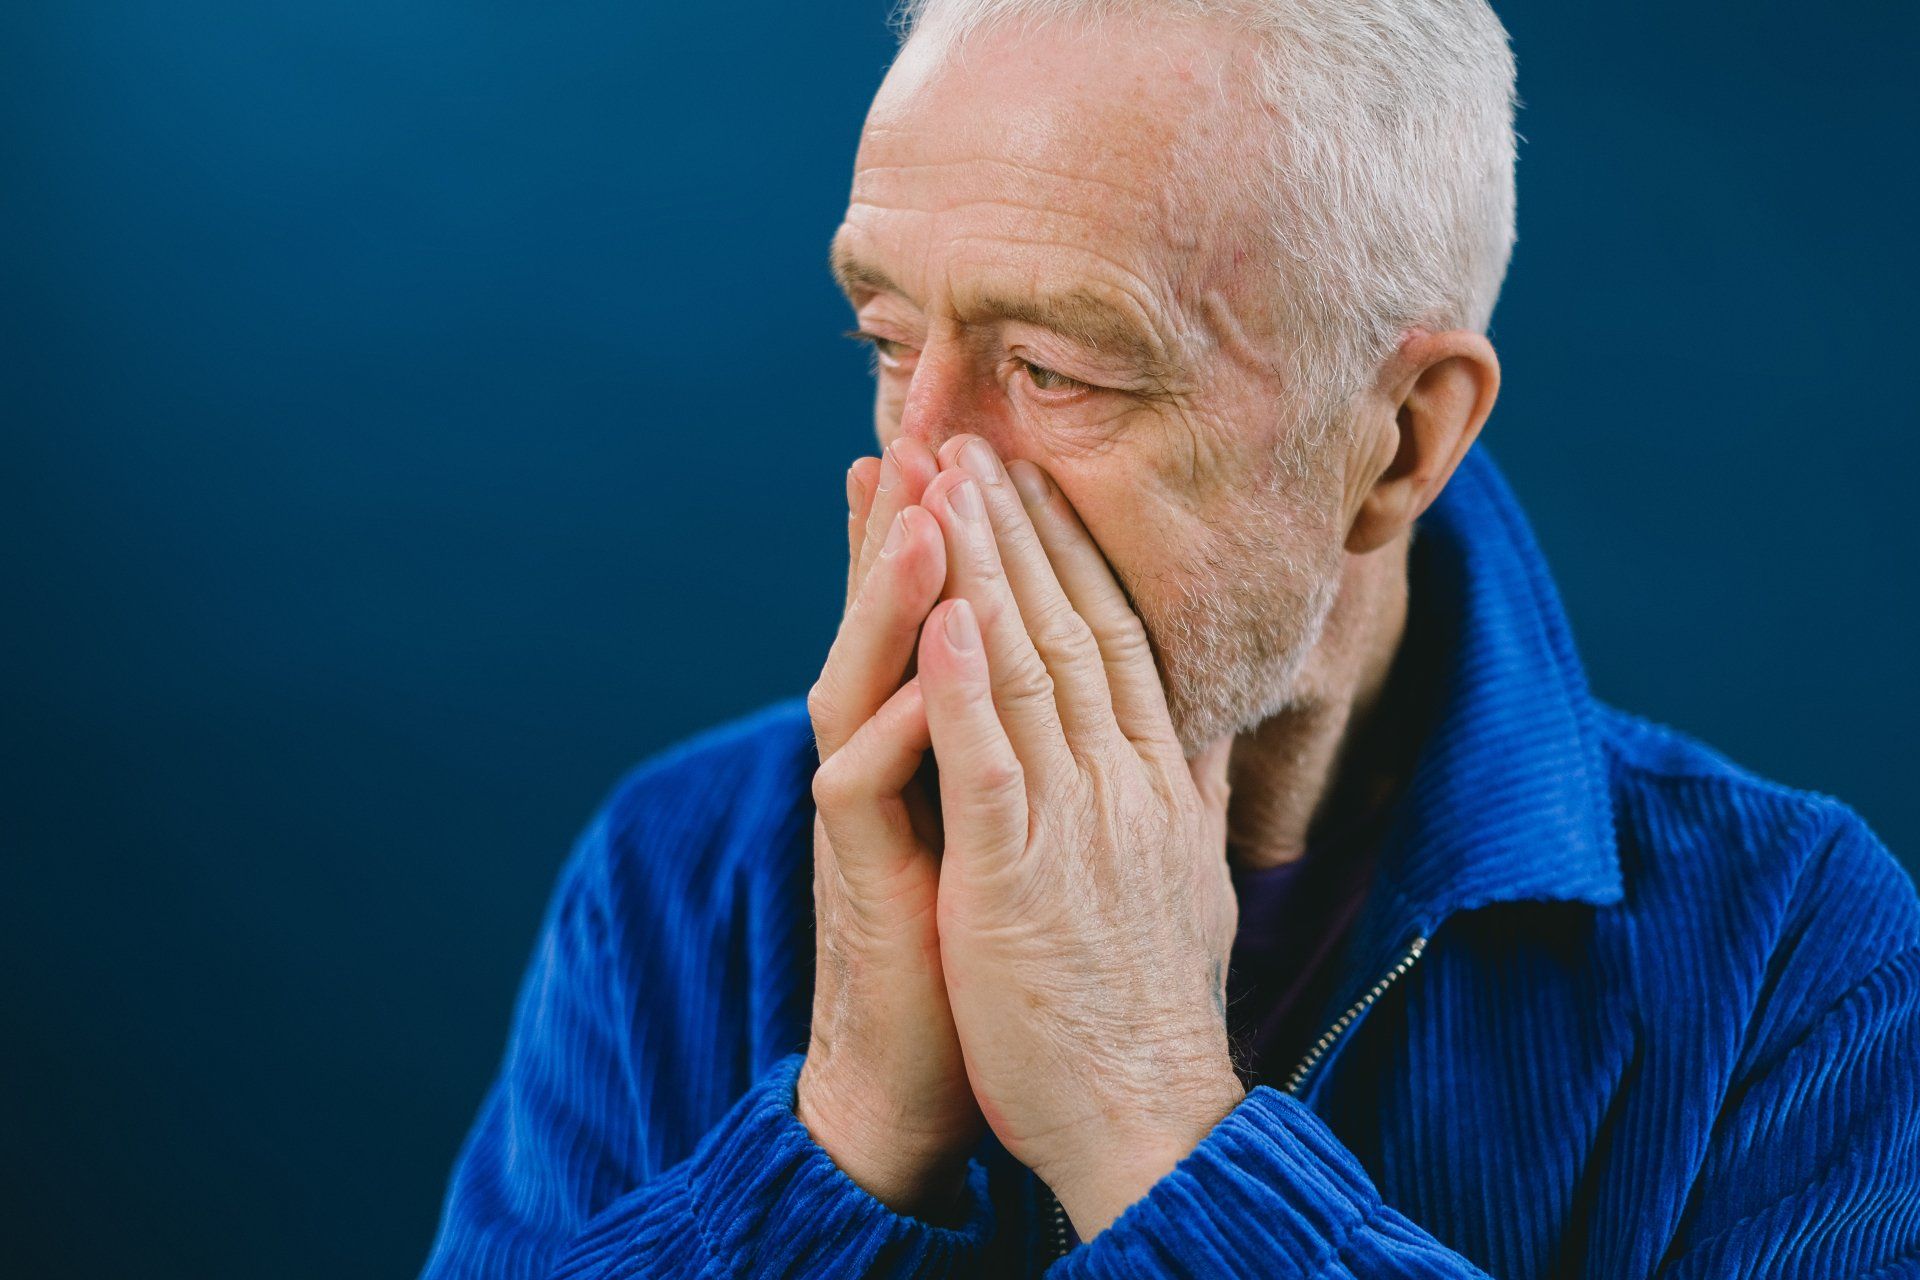 An elderly man in a blue jacket is covering his mouth with his hands.